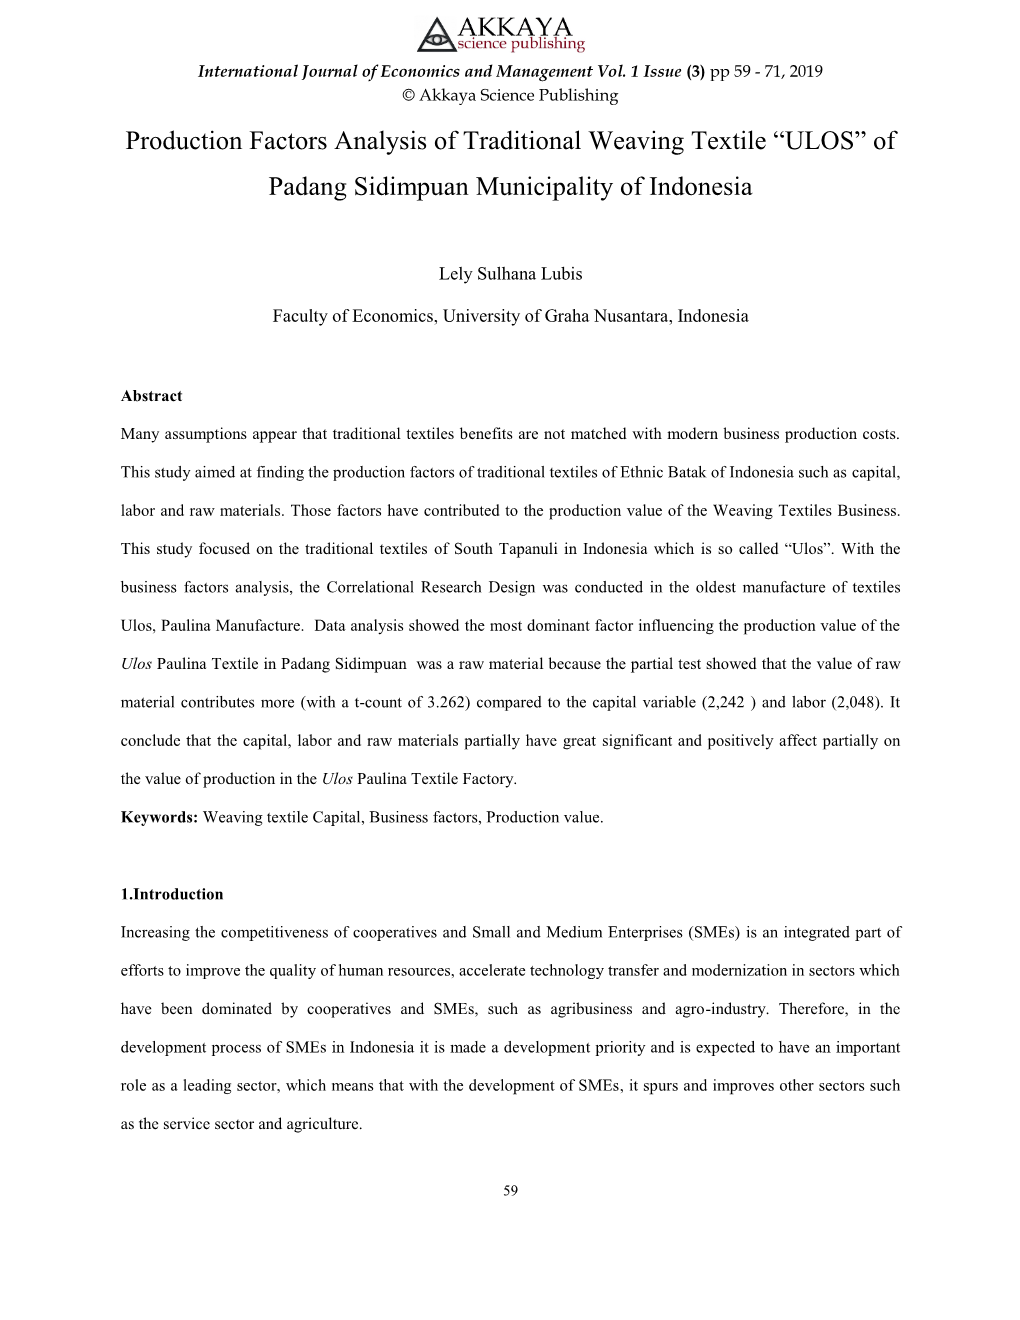 Production Factors Analysis of Traditional Weaving Textile “ULOS” of Padang Sidimpuan Municipality of Indonesia